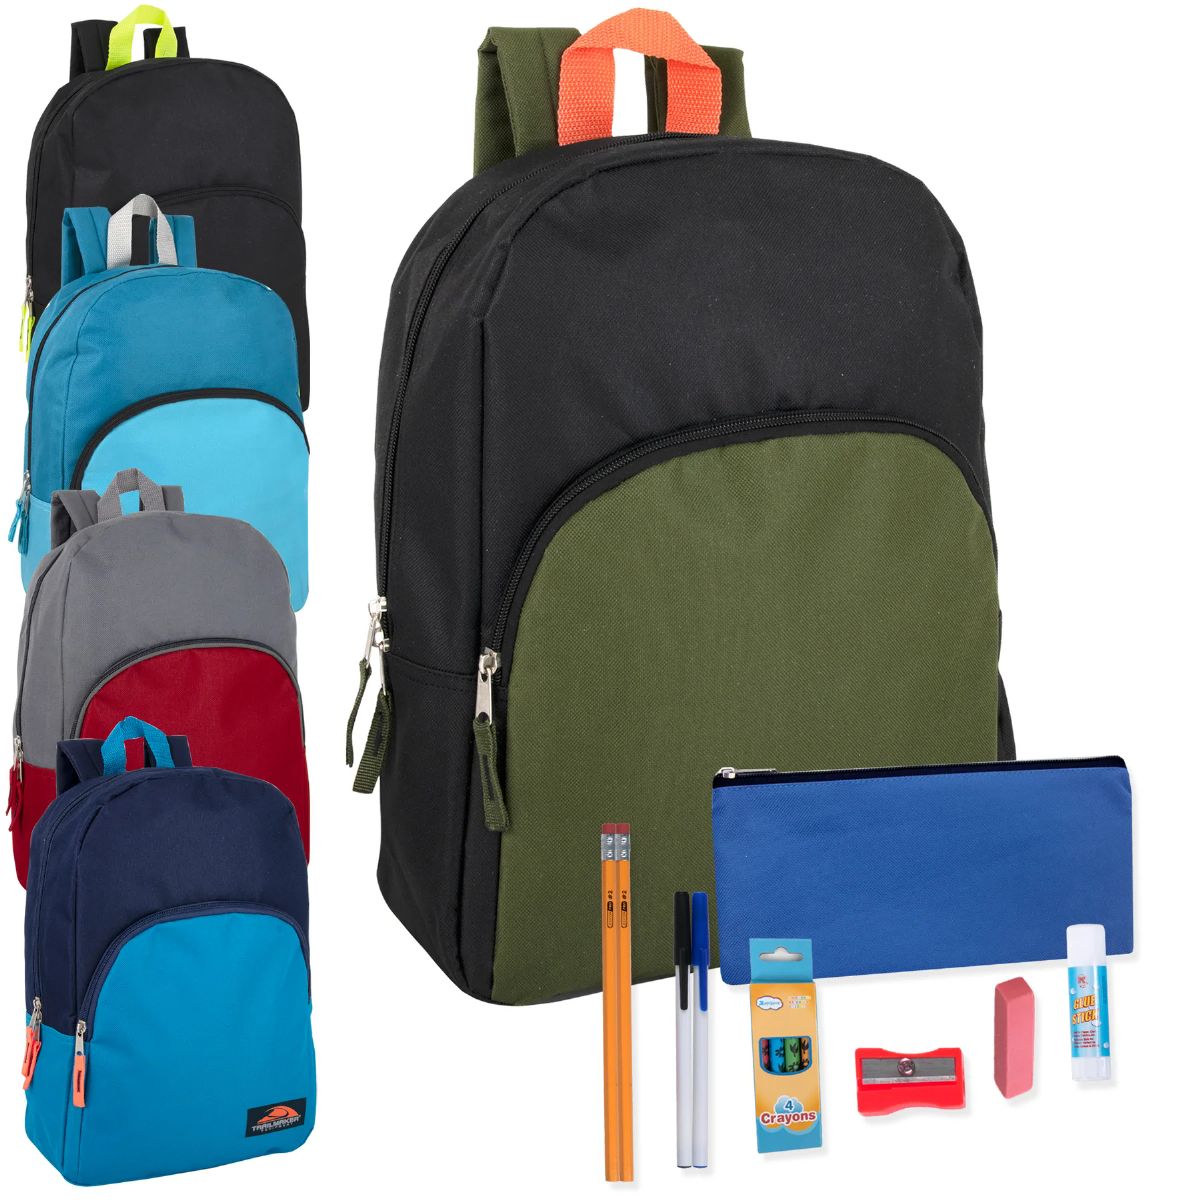 24 Wholesale Preassembled 15 Inch Basic Backpack And 20 Piece School Supply Kit In 12 Color